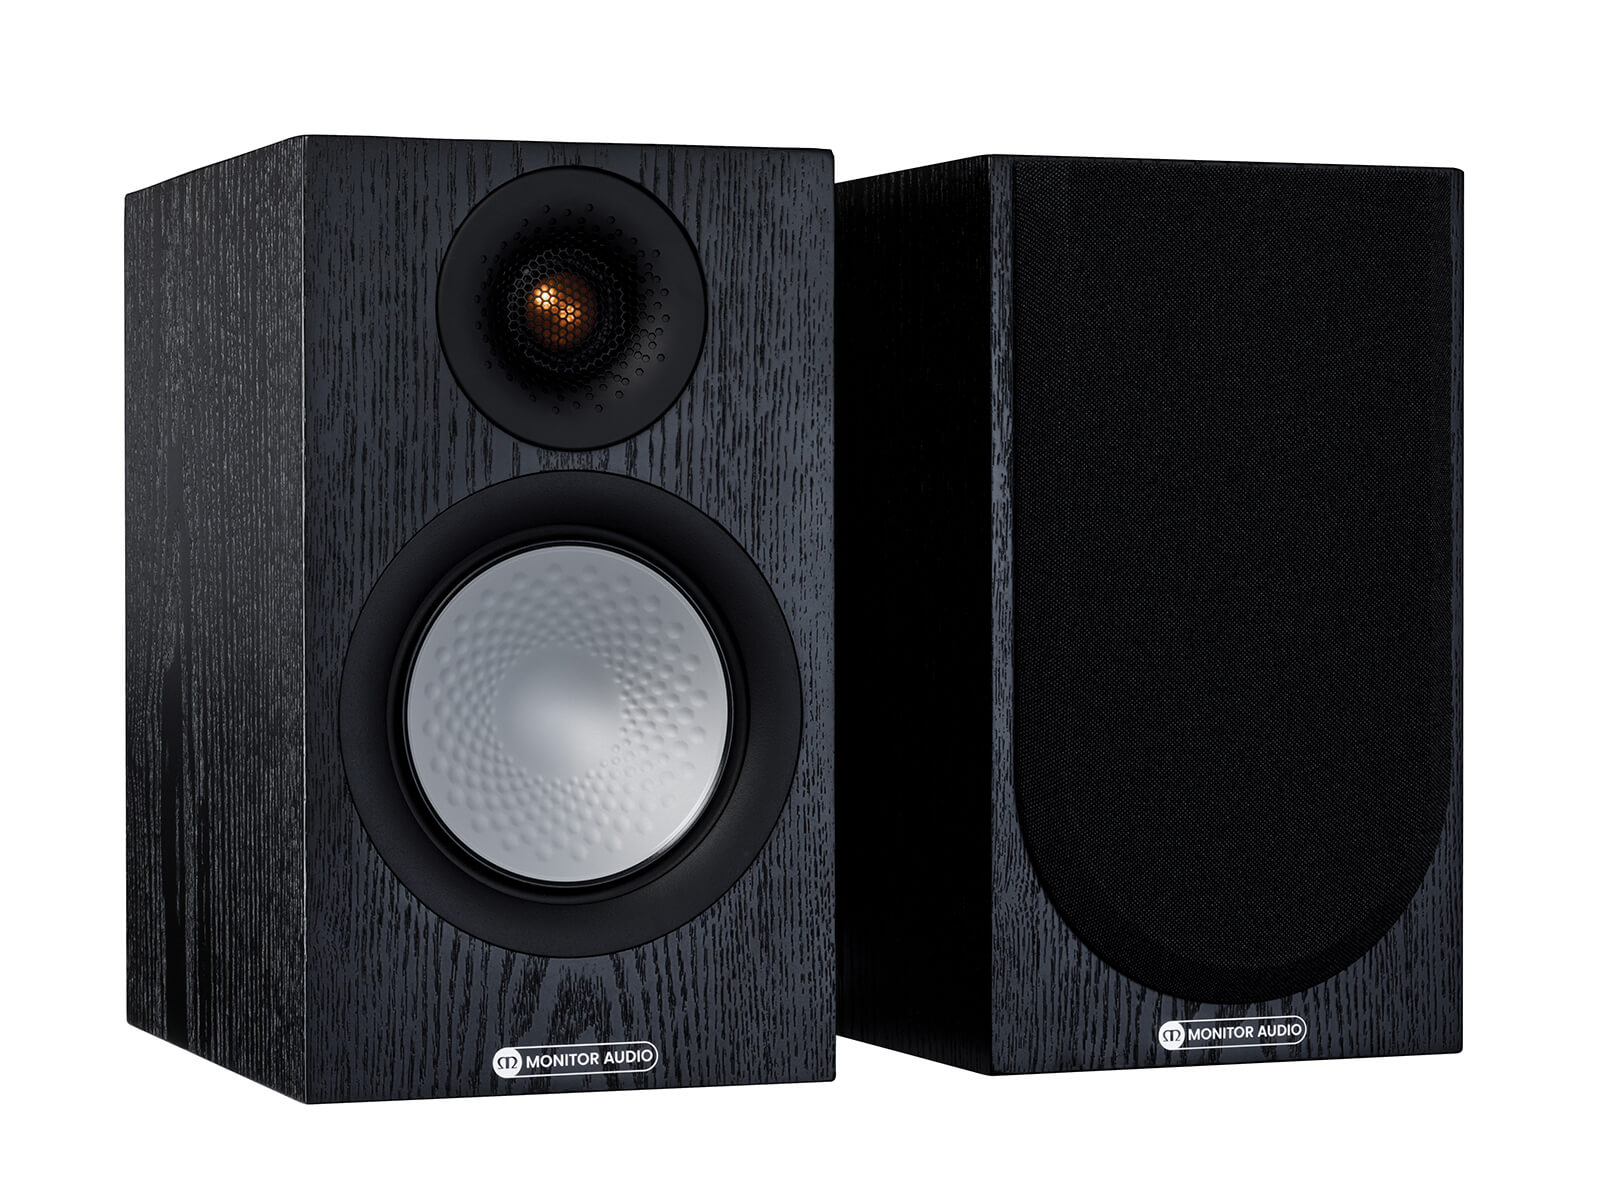 A pair of Monitor Audio's Silver 50 7G, in a black oak finish, iso view, with and without grilles.